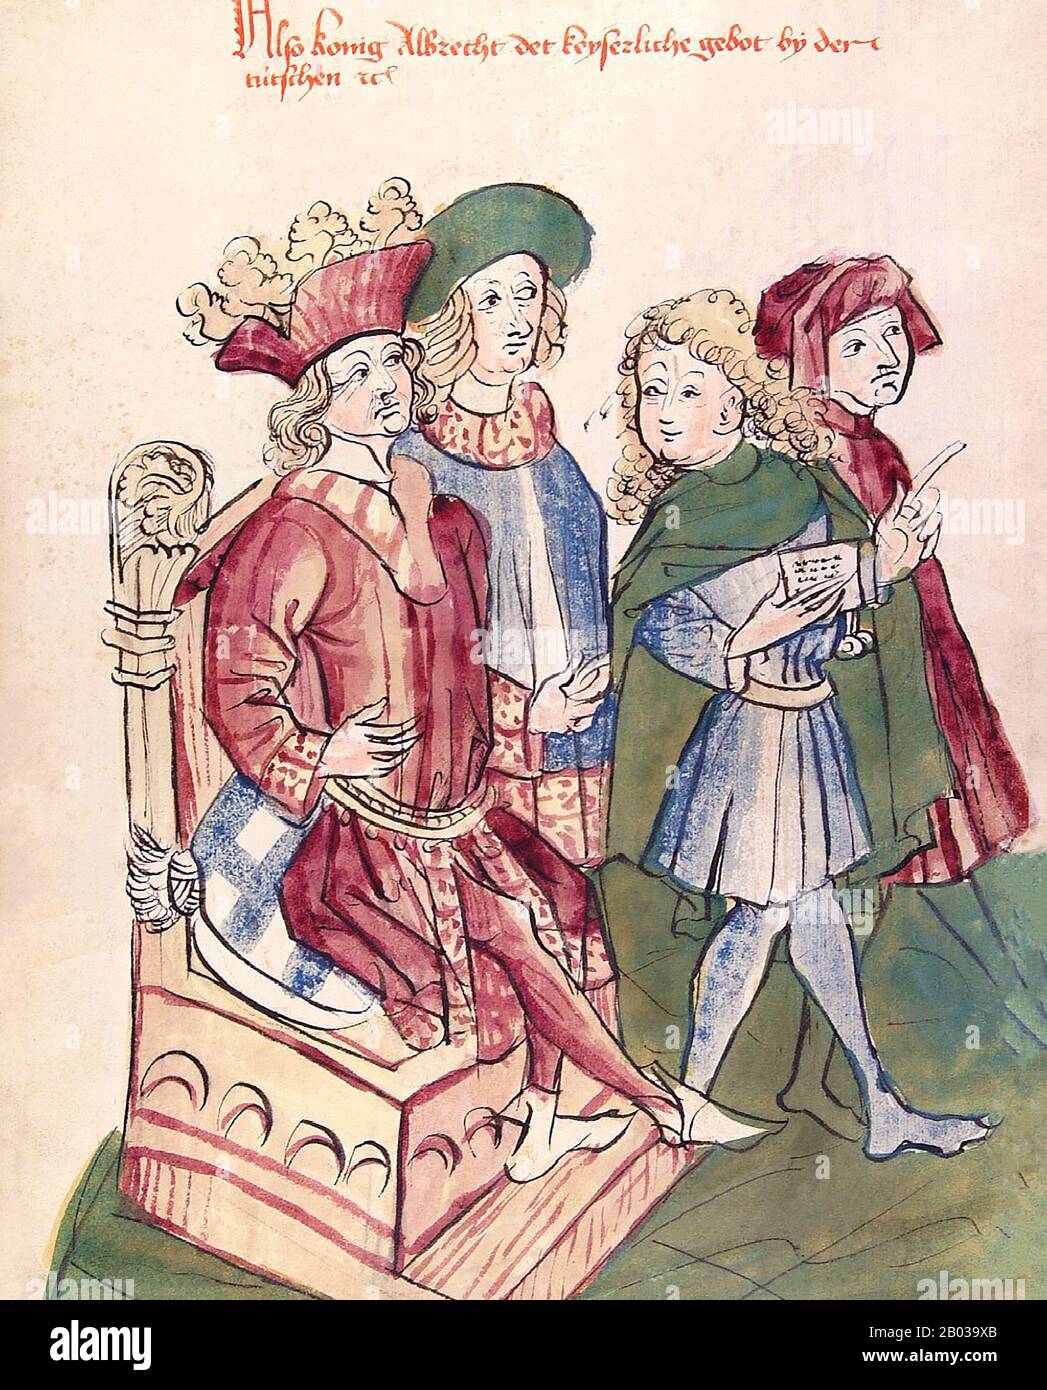 Albert I (1255-1308), also known as Albert of Habsburg, was the eldest son of King Rudolf I, and was made landgrave of Swabia in 1273, looking over his father's possessions in Alsace. He was then made Duke of Austria and Styria in 1283, alongside his younger brother Rudolf II. When his father died without managing to secure Albert's election as successor, he was forced to recognise the sovereignty of the elected King Adolf of Nassau.  Albert did not abandon his hopes for the German crown however, biding his time and working with Adolf's enemies and former allies to eventually have him deposed Stock Photo